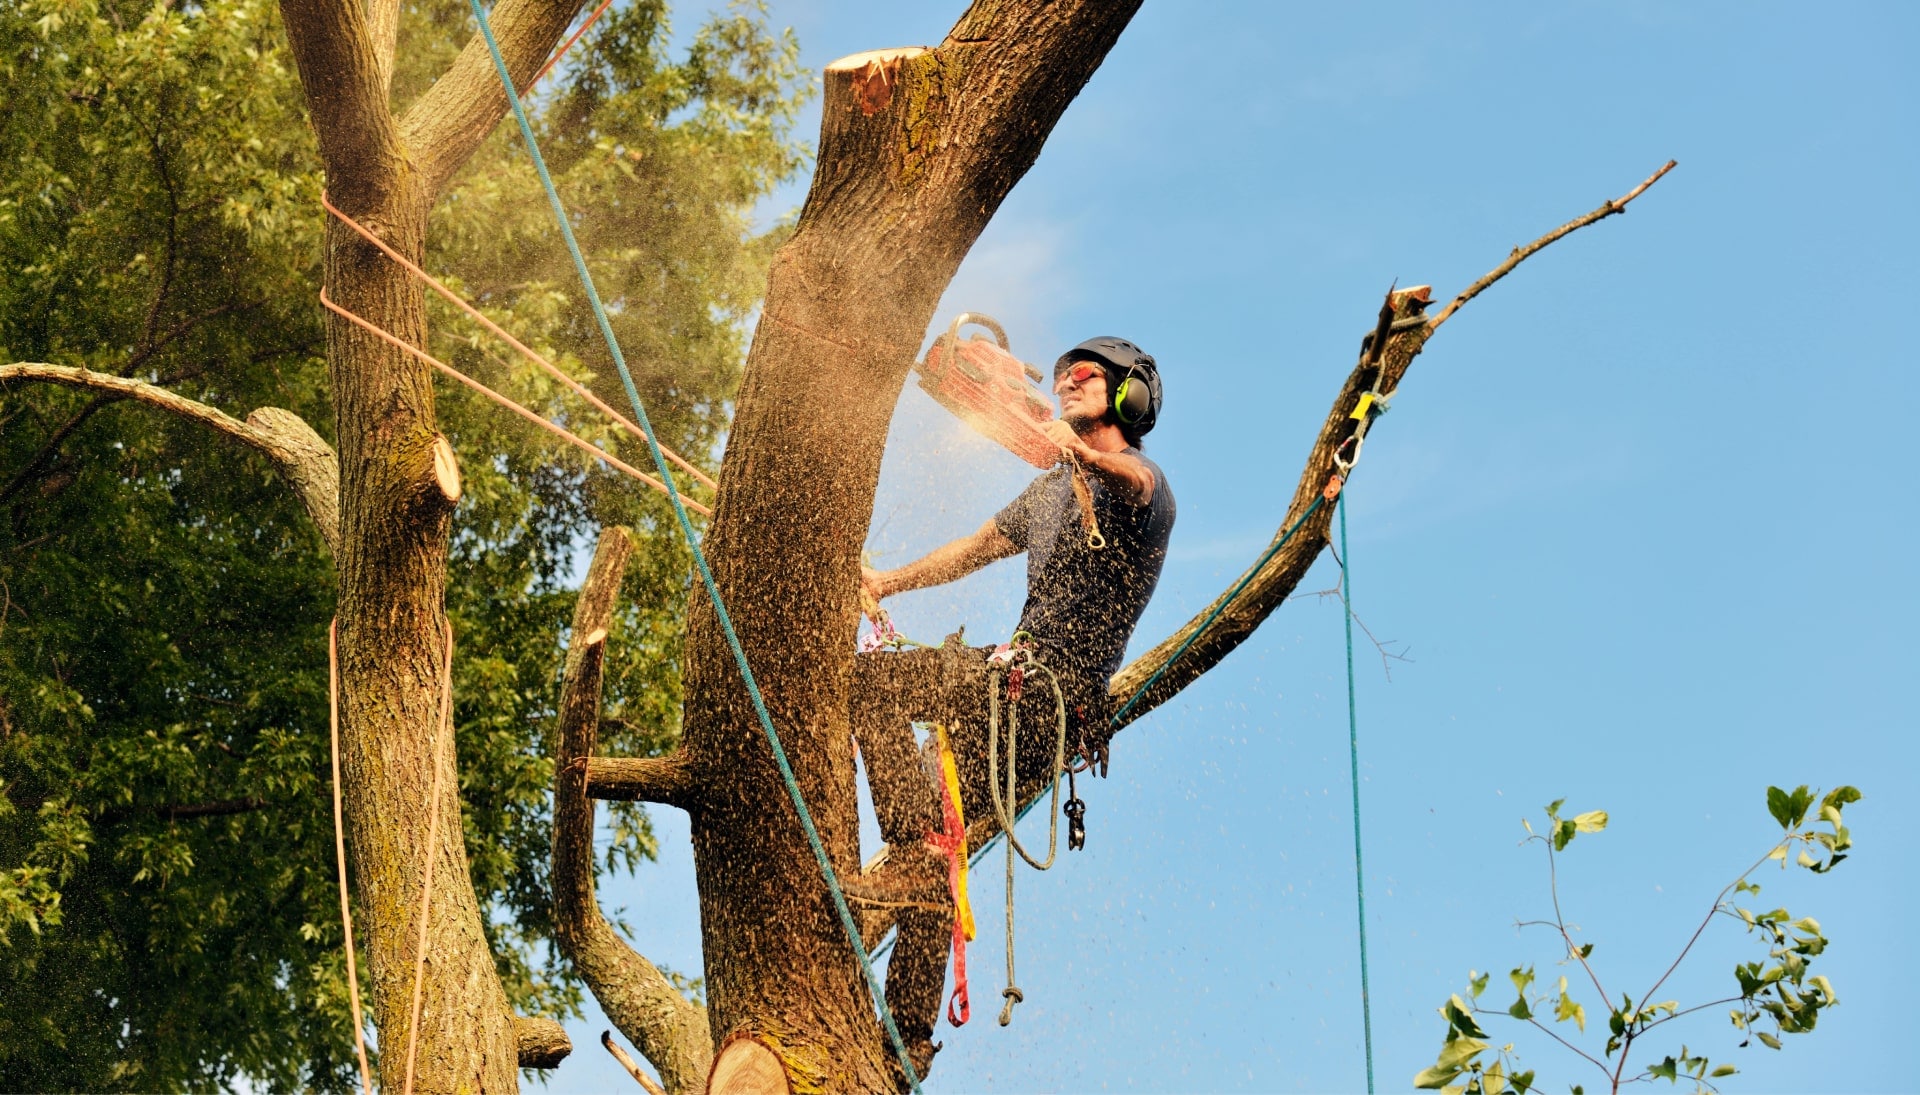 Joplin tree removal experts solve tree issues.